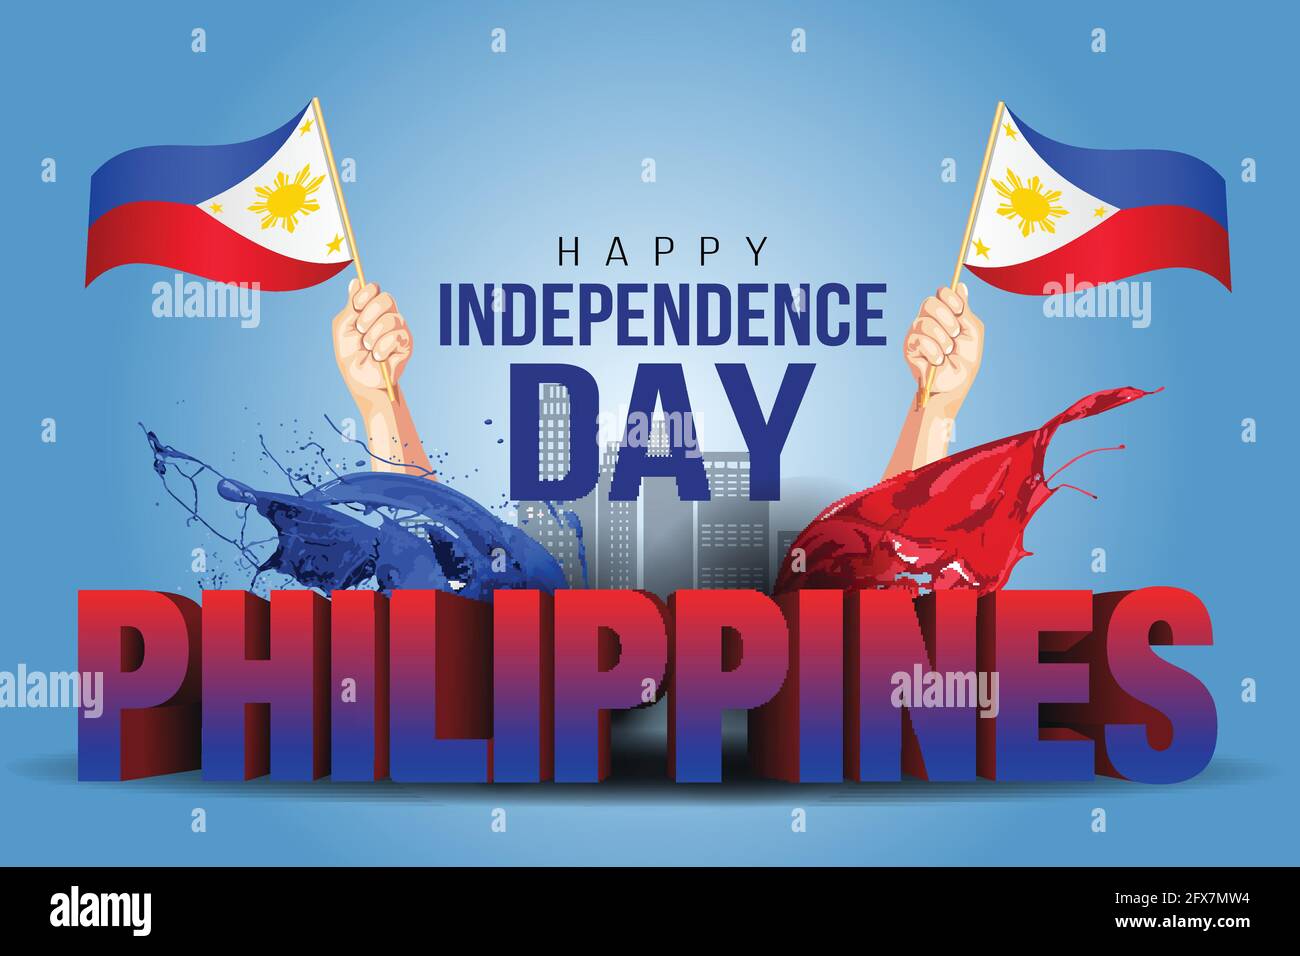 Happy Independence Day Philippine Vector Template Design ...